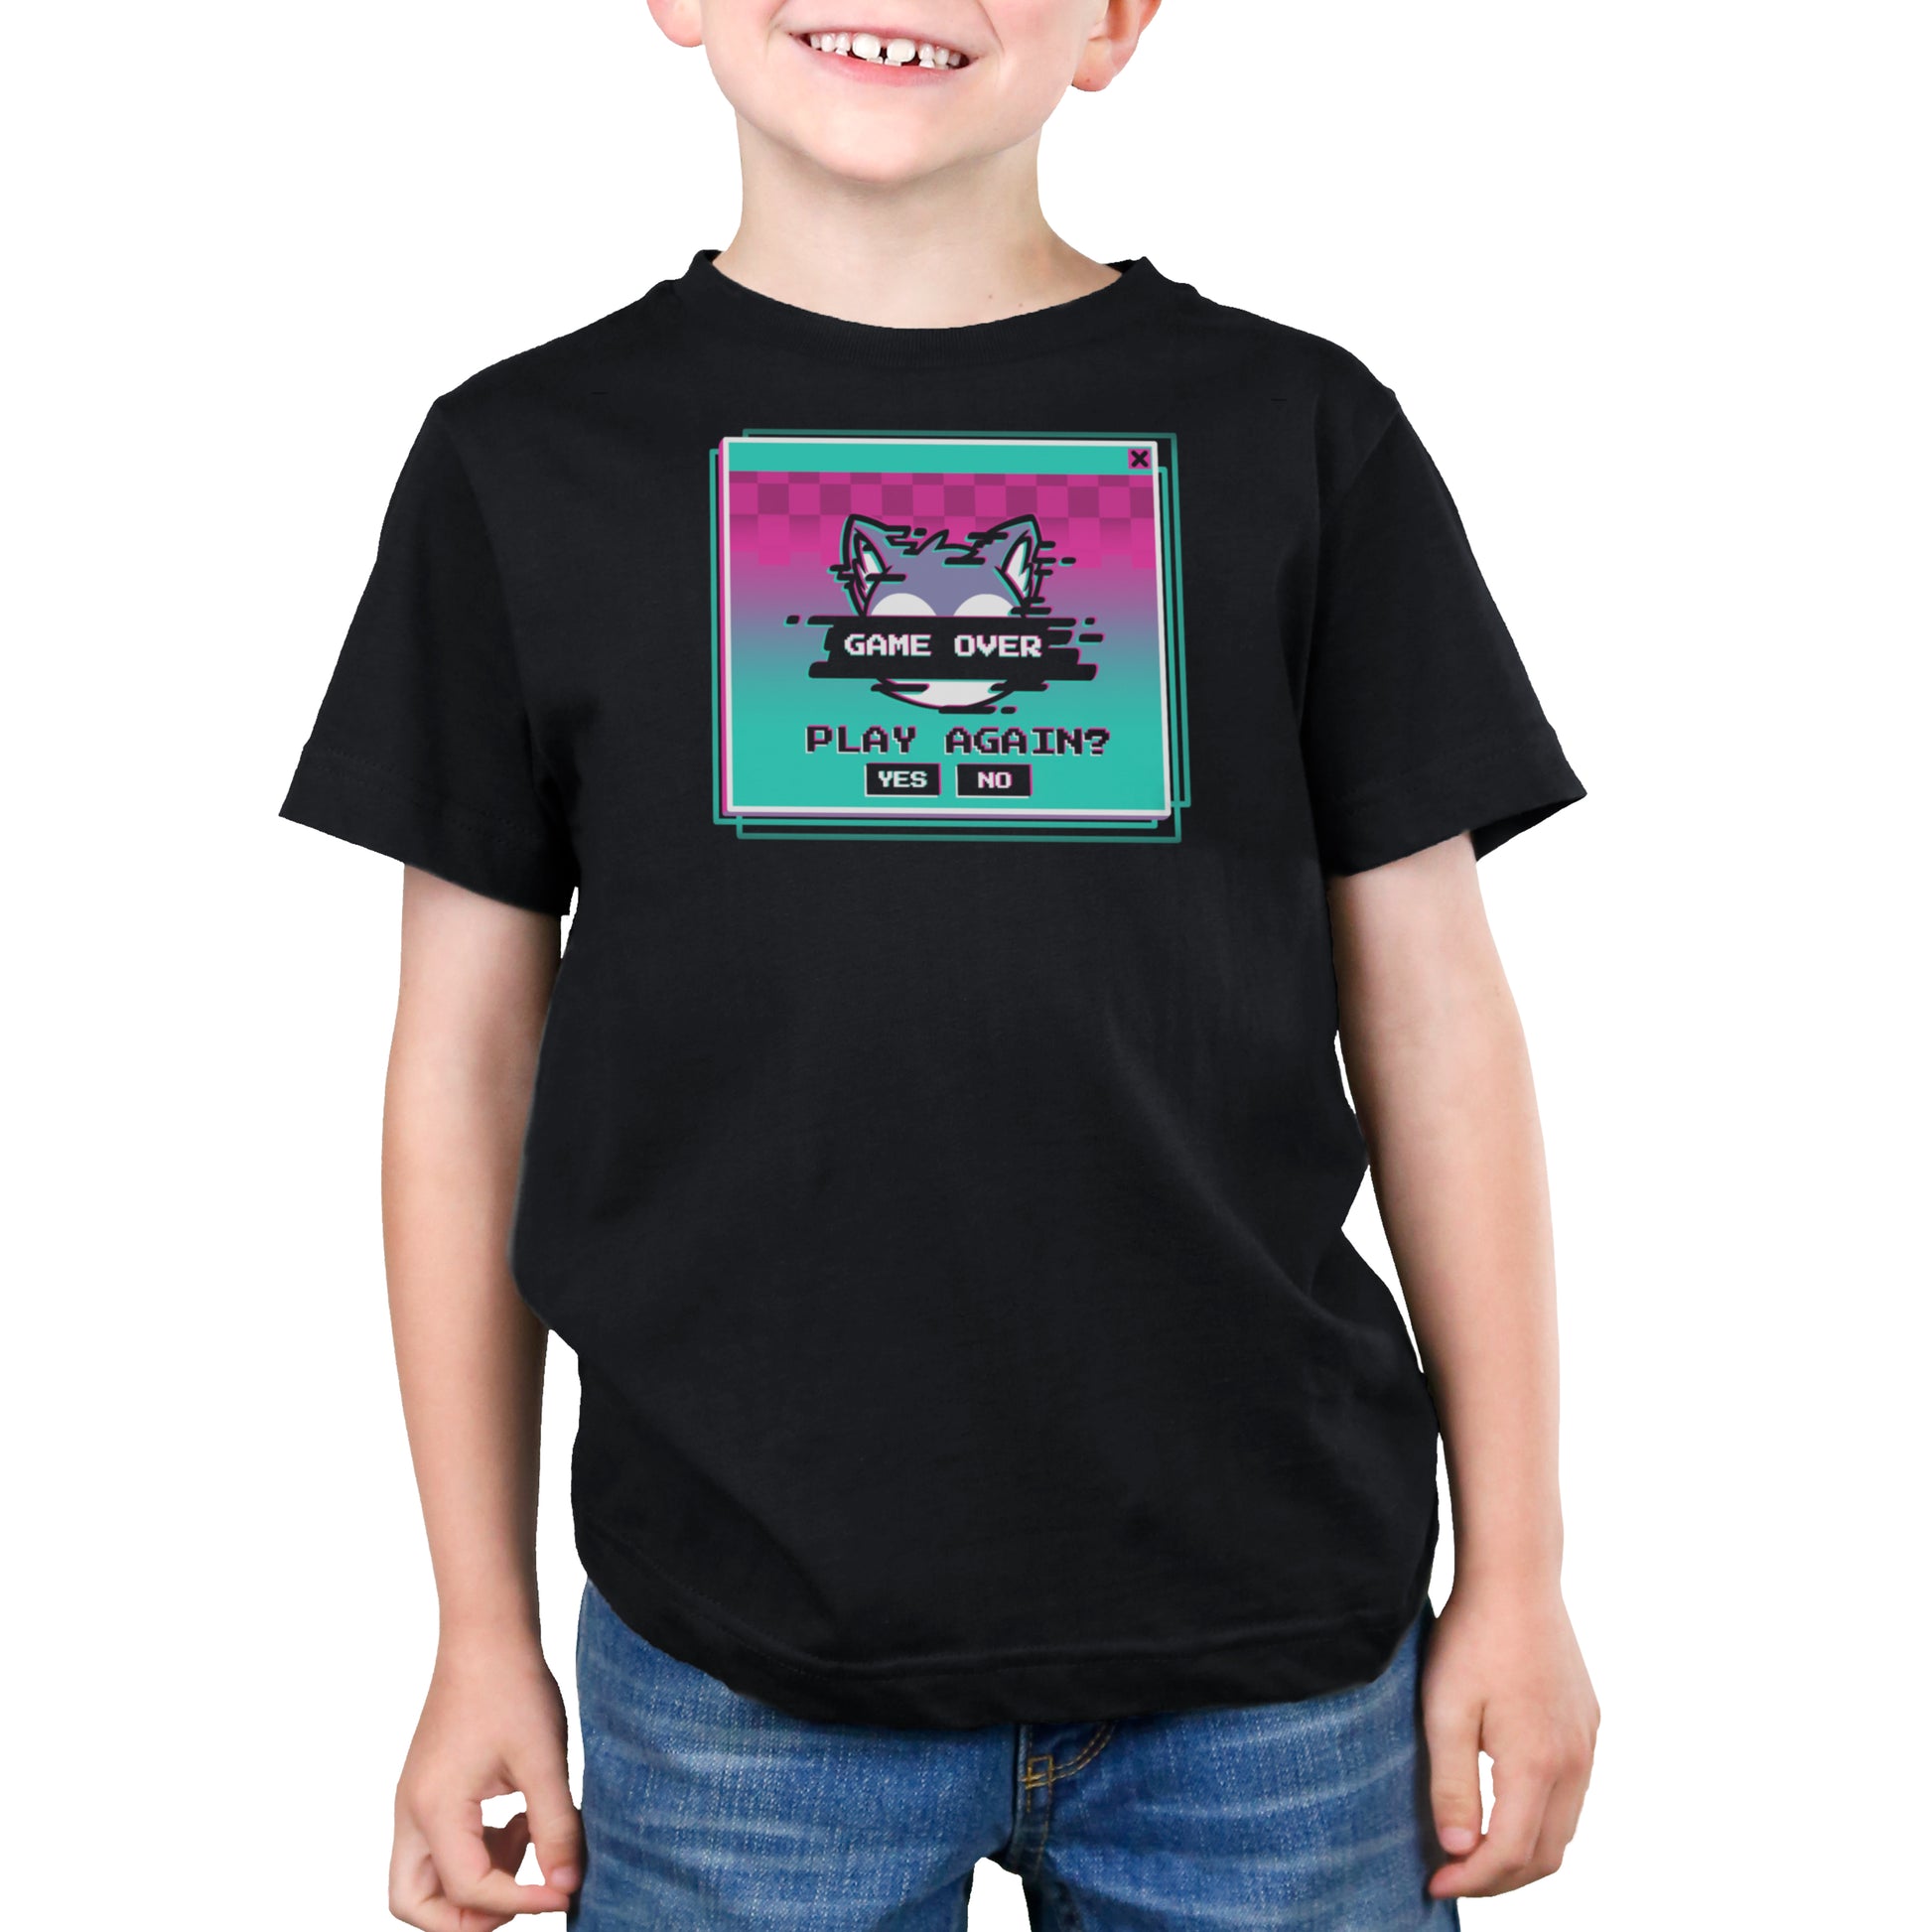 A child wearing a black Game Over, Play Again? t-shirt from monsterdigital made from super soft ringspun cotton with a colorful graphic of a cat and the text "Game Over" and "Play Again? Yes No." The unisex tee complements their slight smile as they stand with hands by their sides.